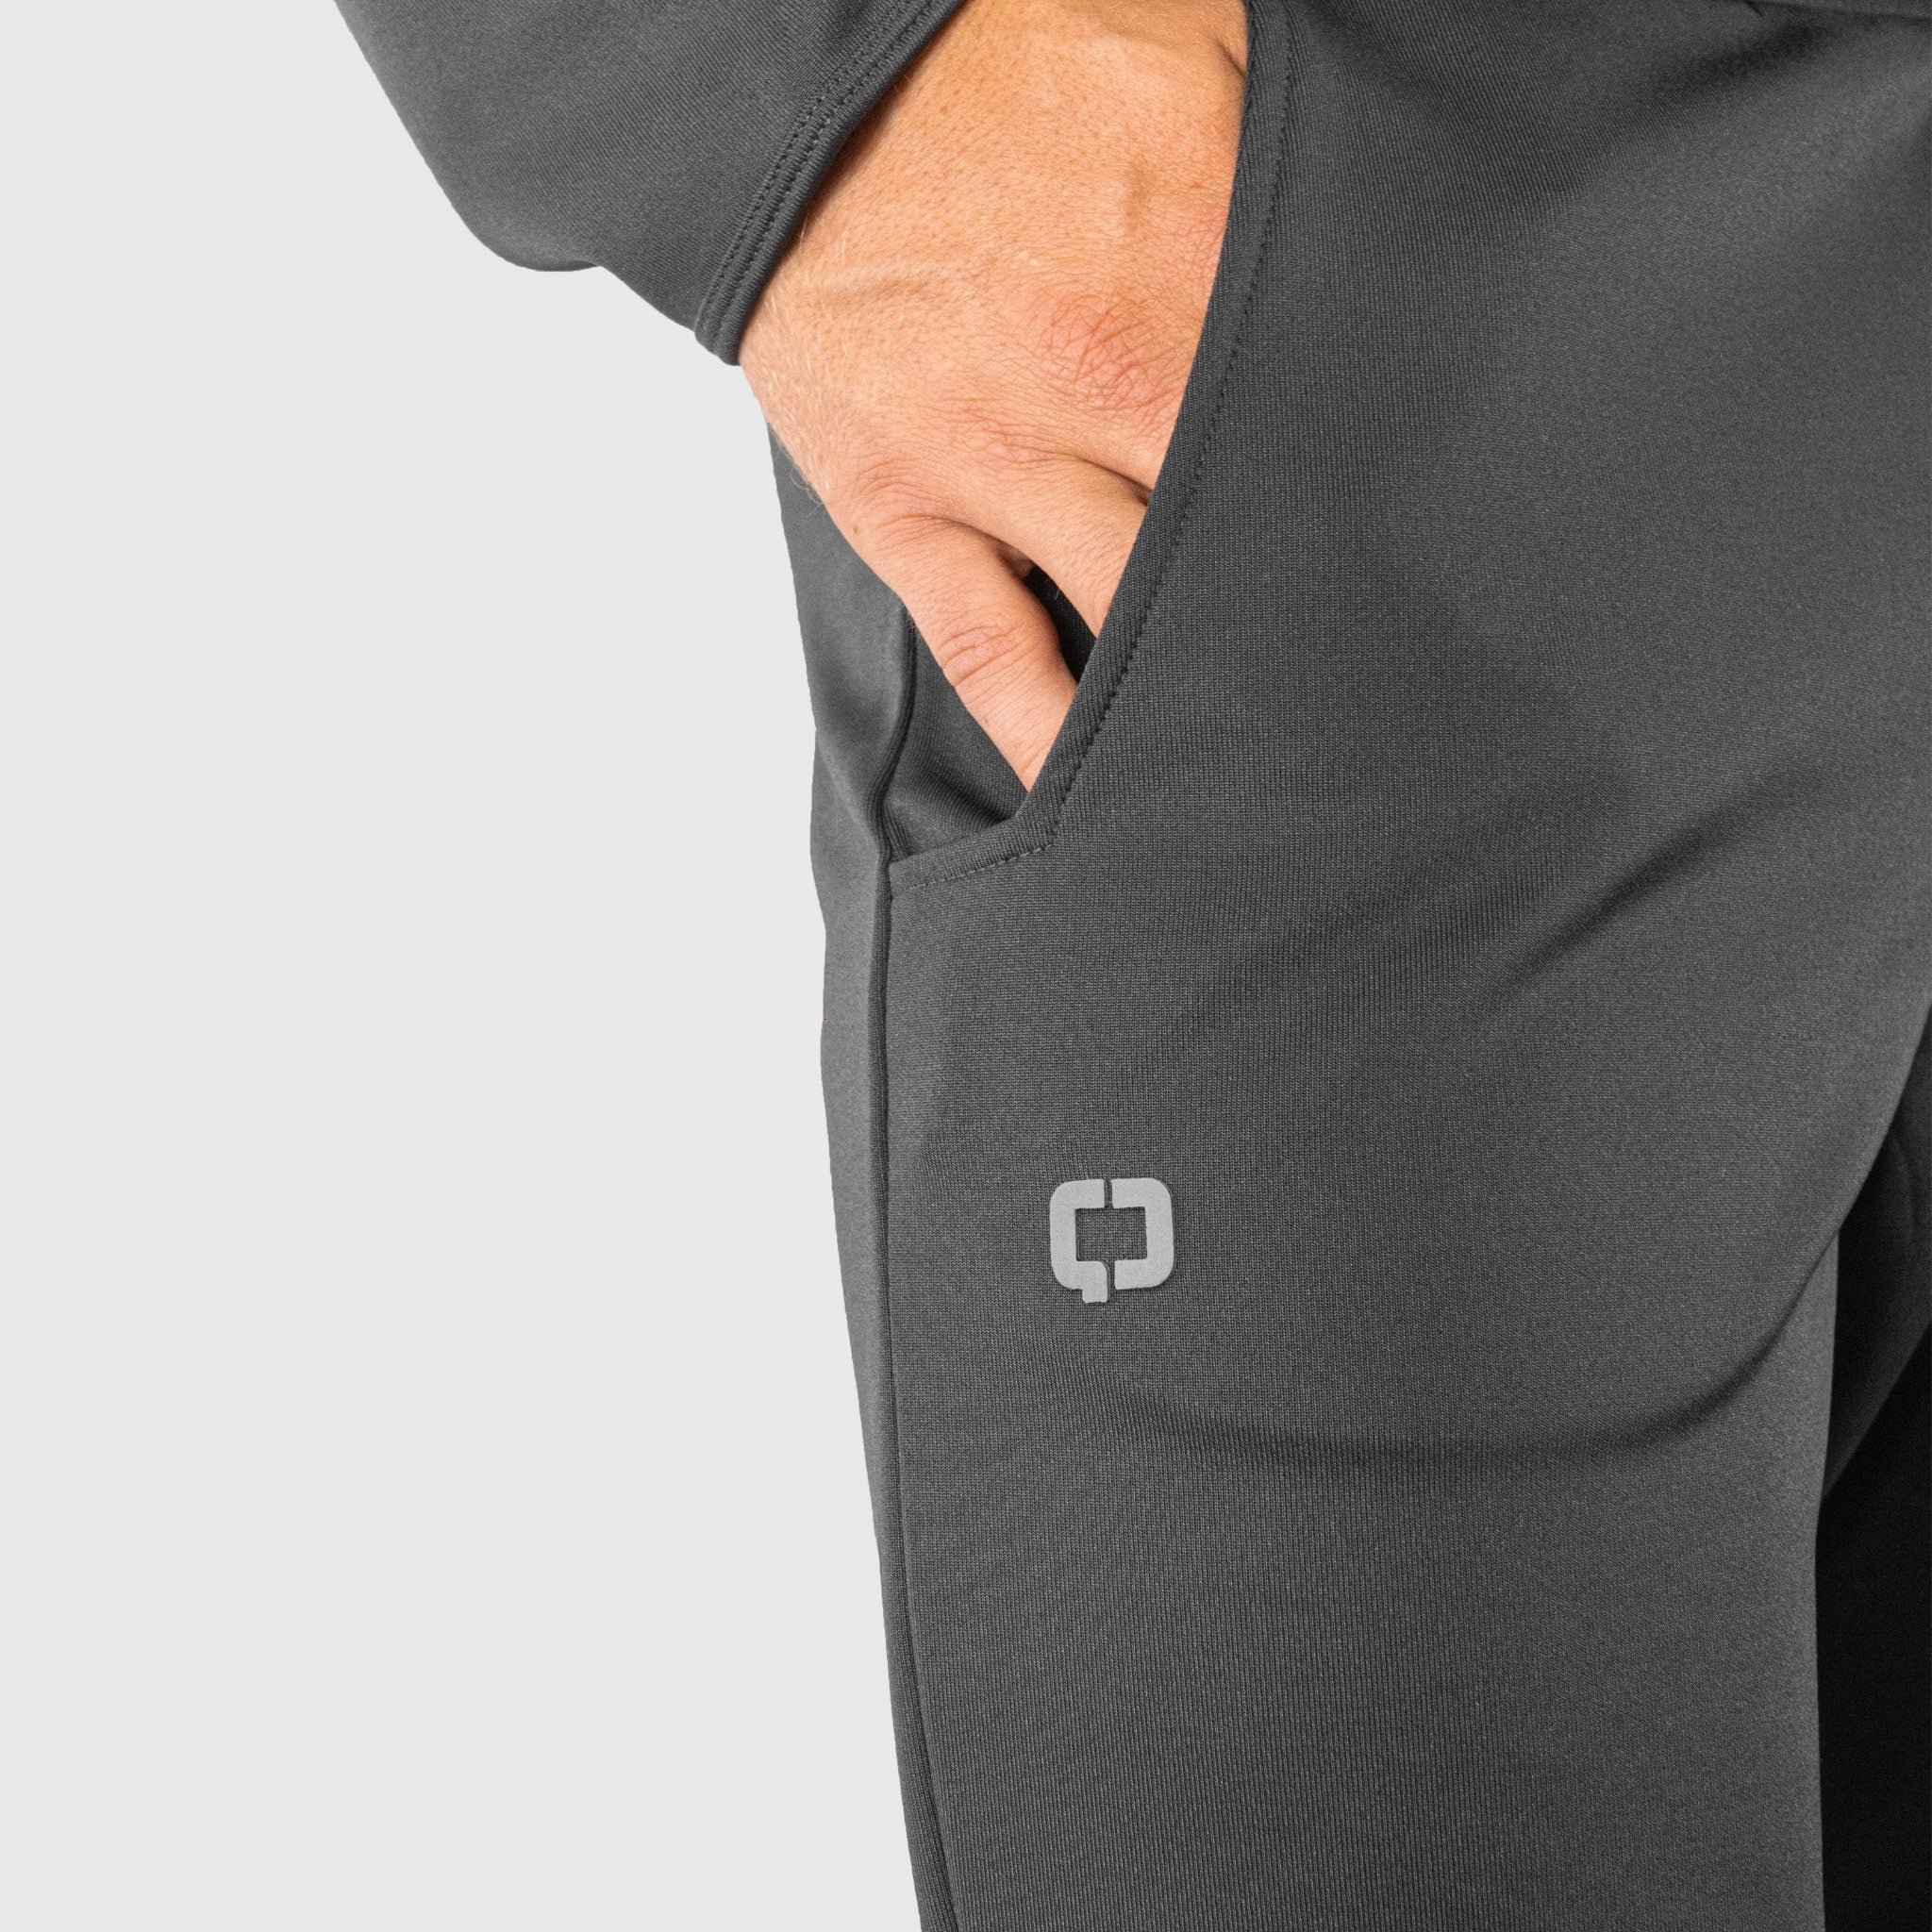 Quad Padel First-Class Tracksuit pocket detail